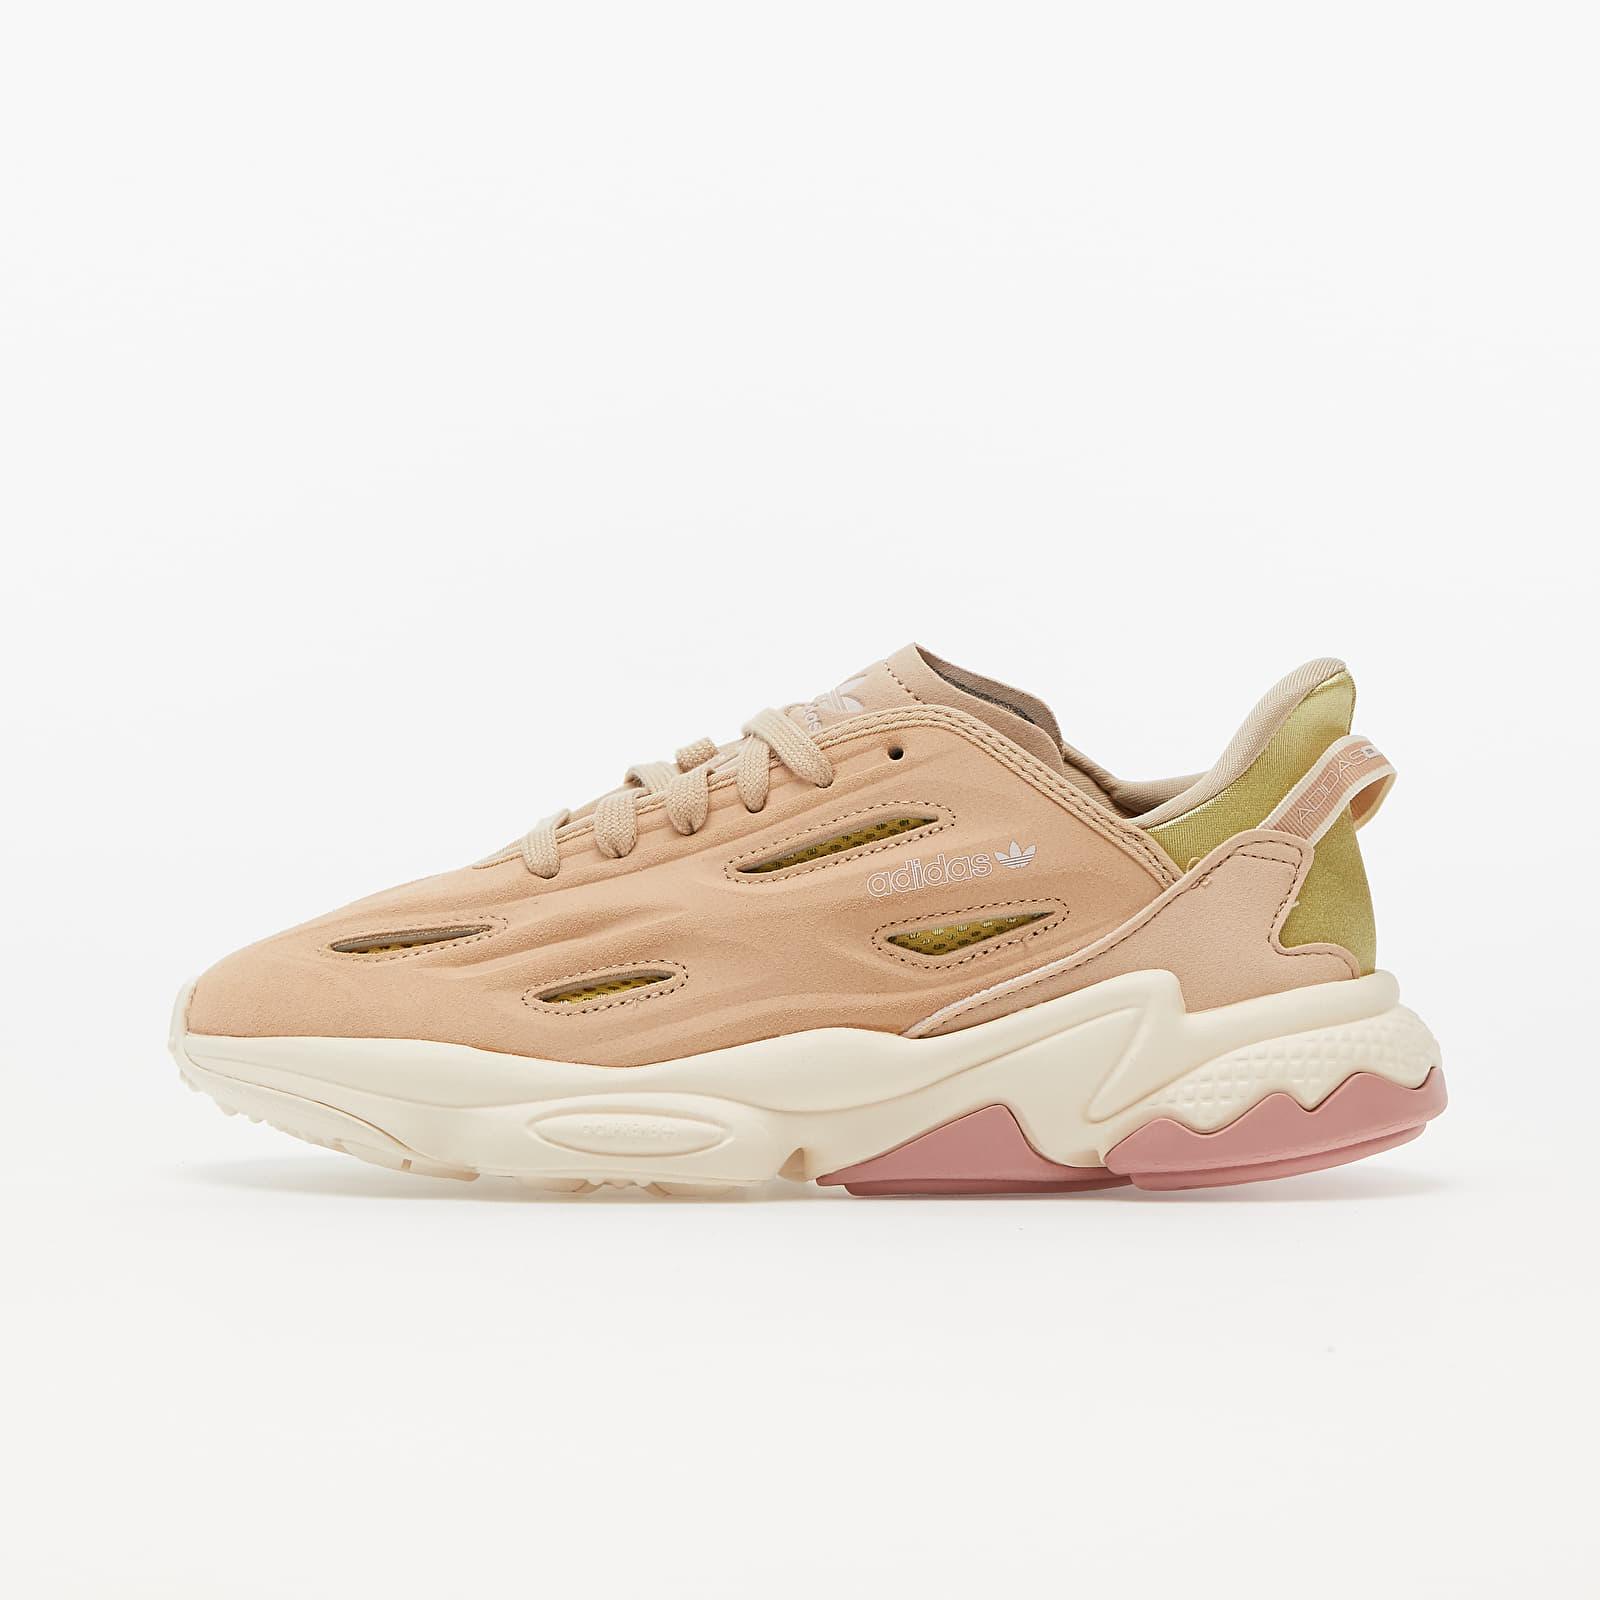 adidas Originals Adidas Ozweego Celox W St Pale Nude/ Worn White/ Clear  Pink in Natural | Lyst